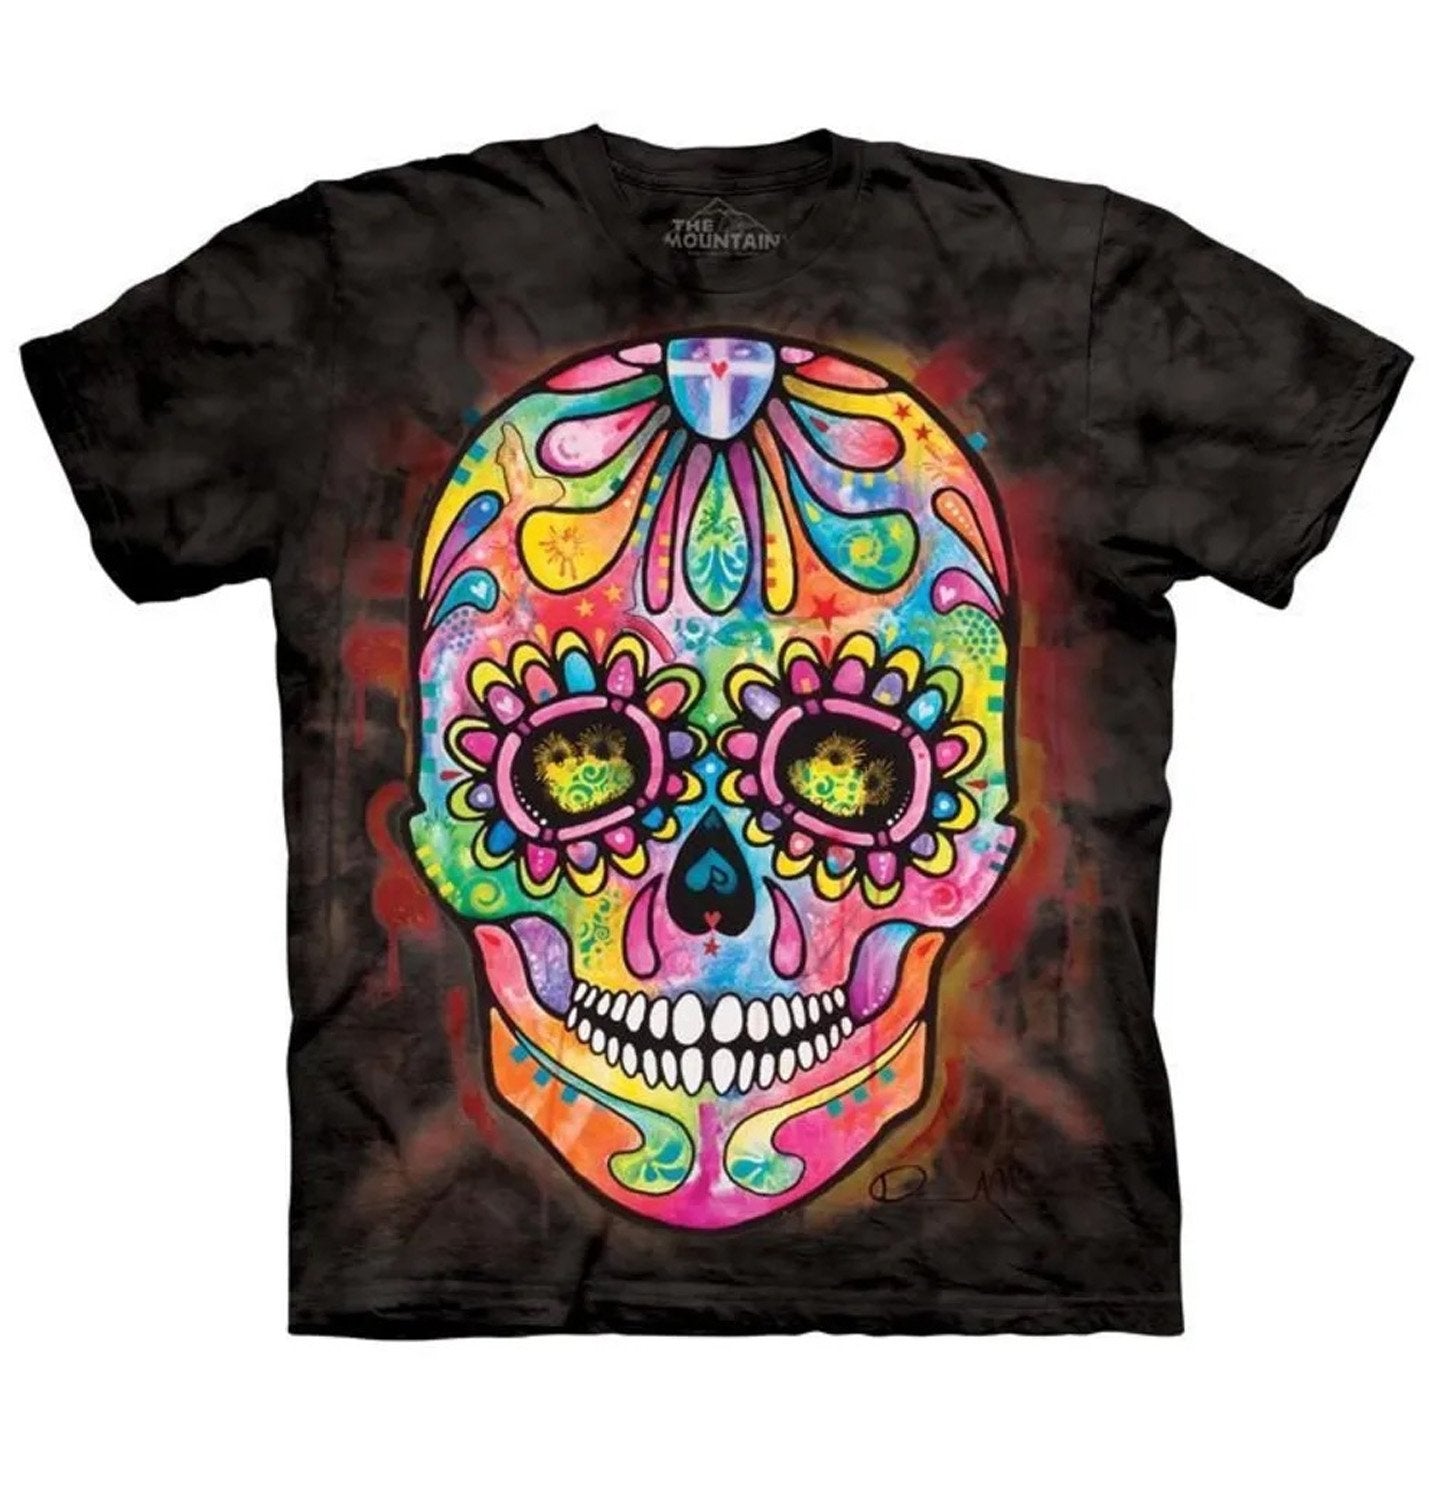 The Mountain - Day Of The Dead - Adult Unisex T-Shirt